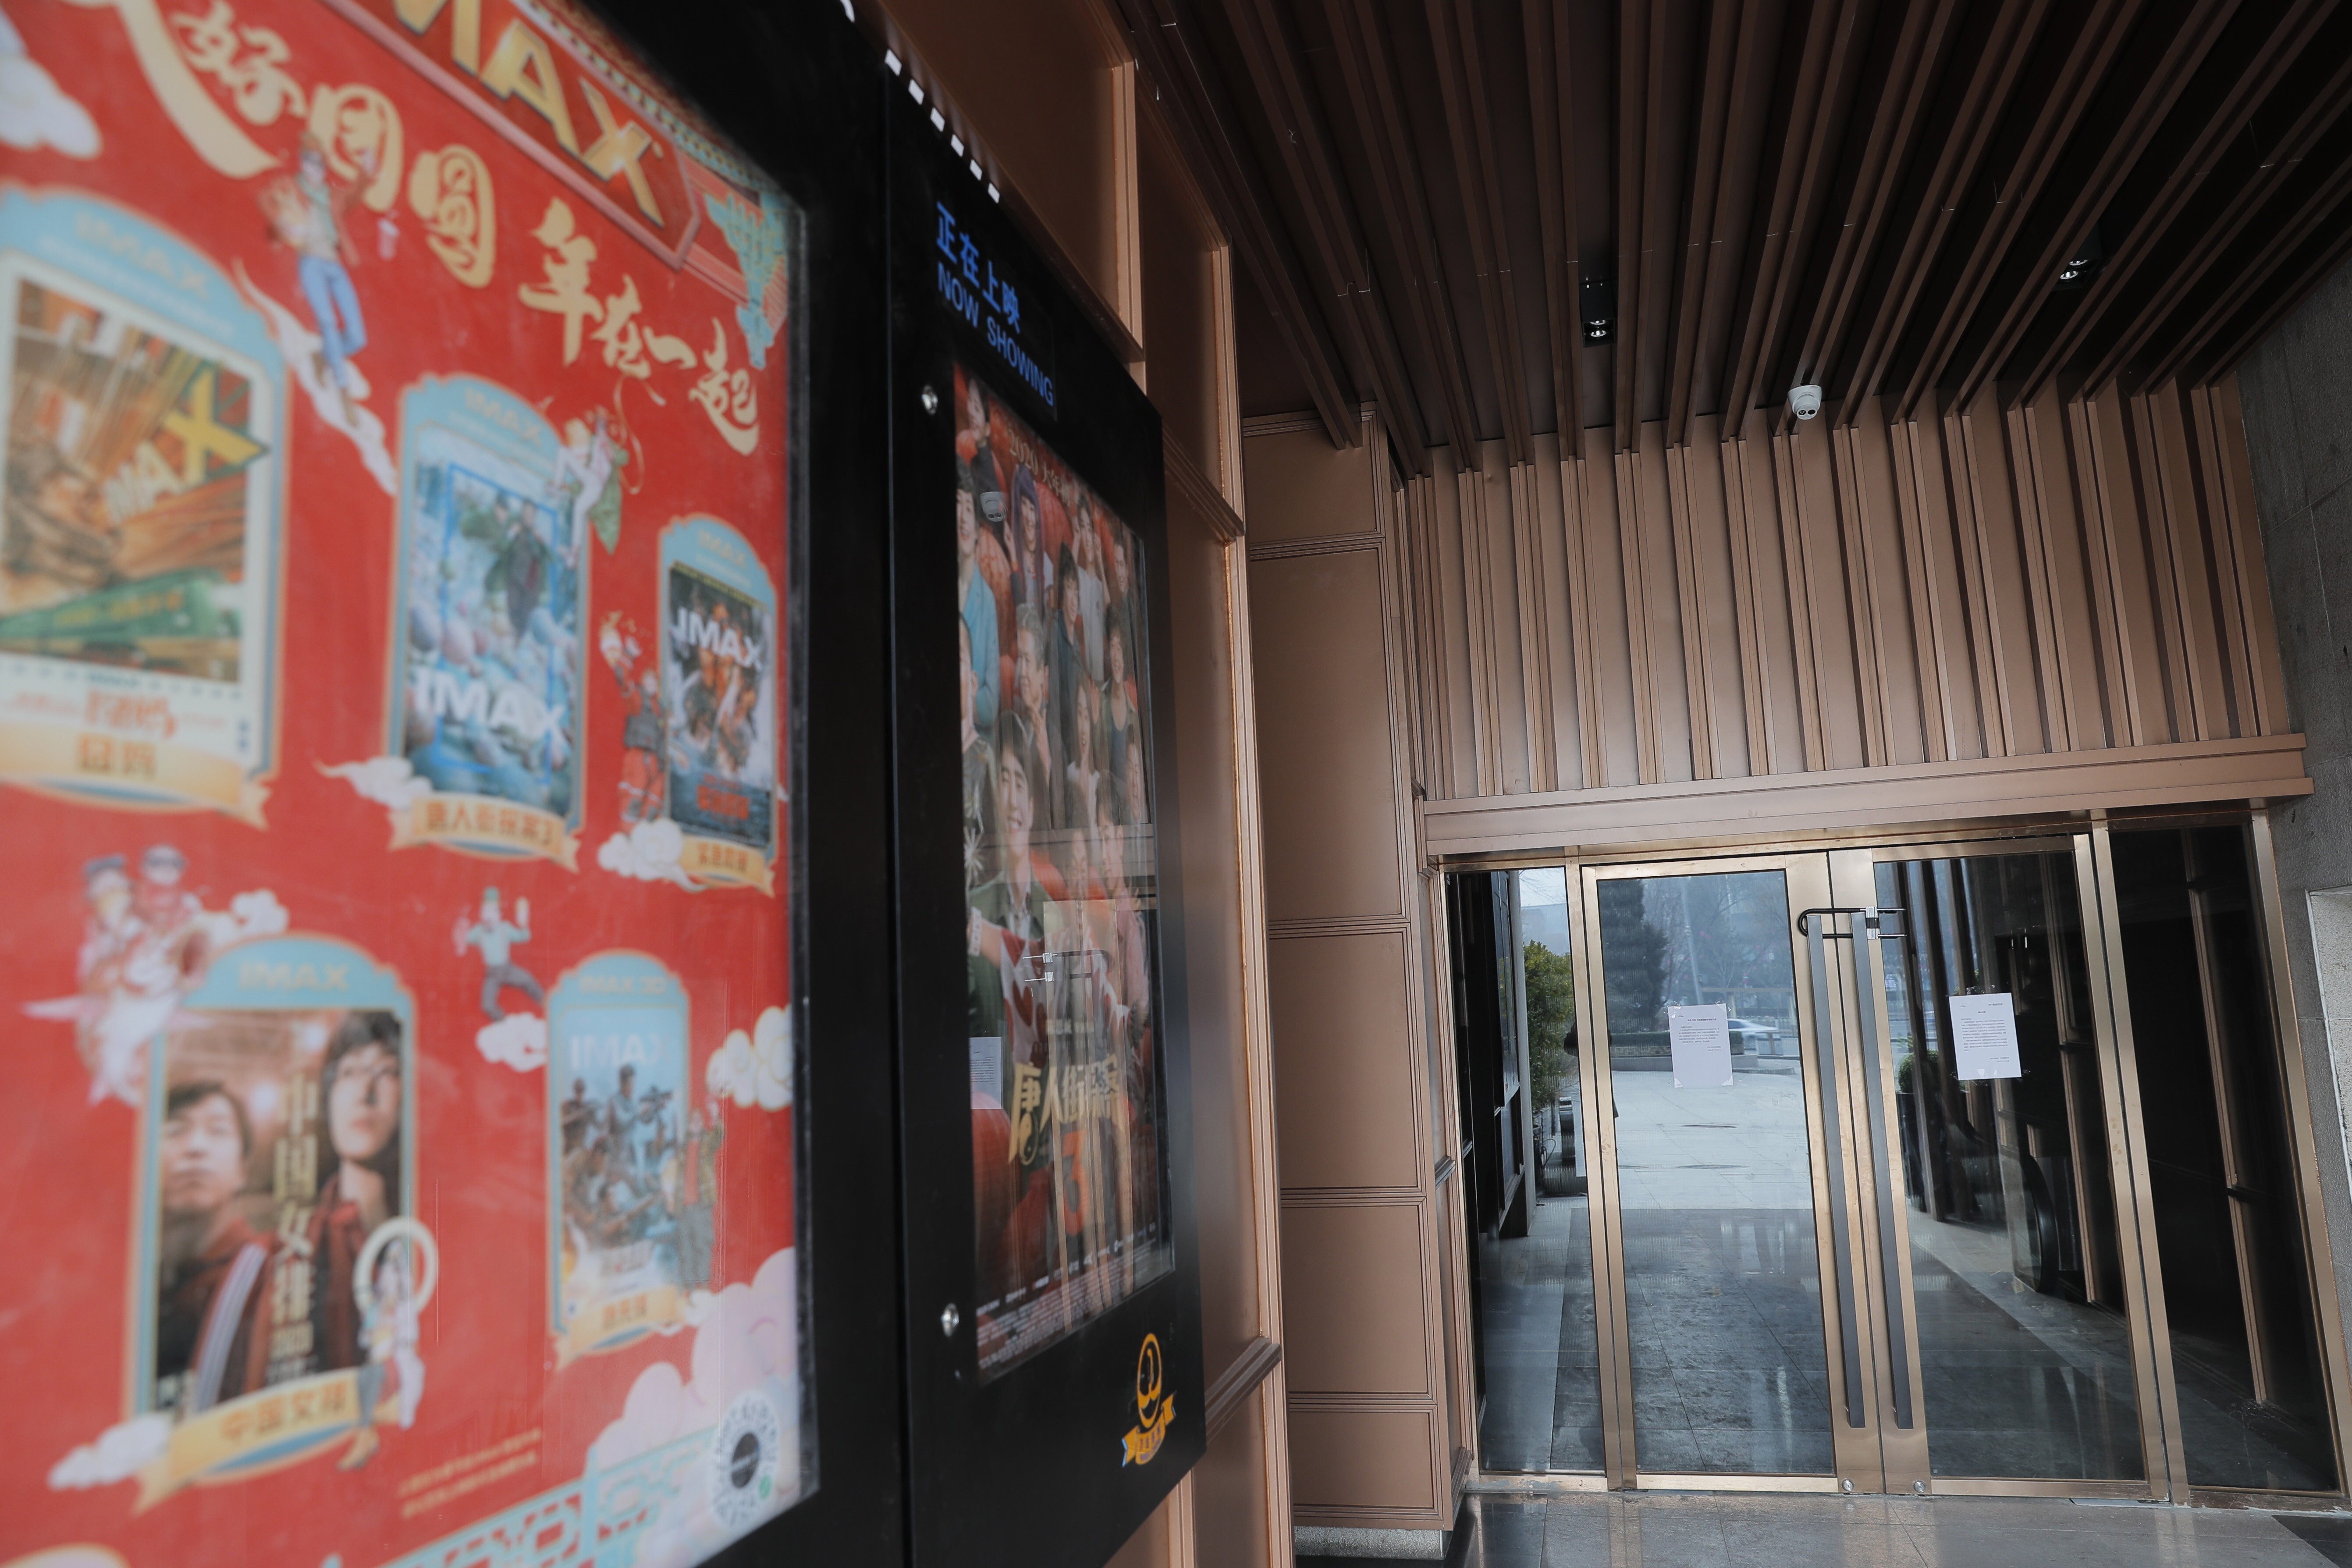 Cinemas have remained closed in China since late January due to the Covid-19 epidemic. Photo: EPA-EFE